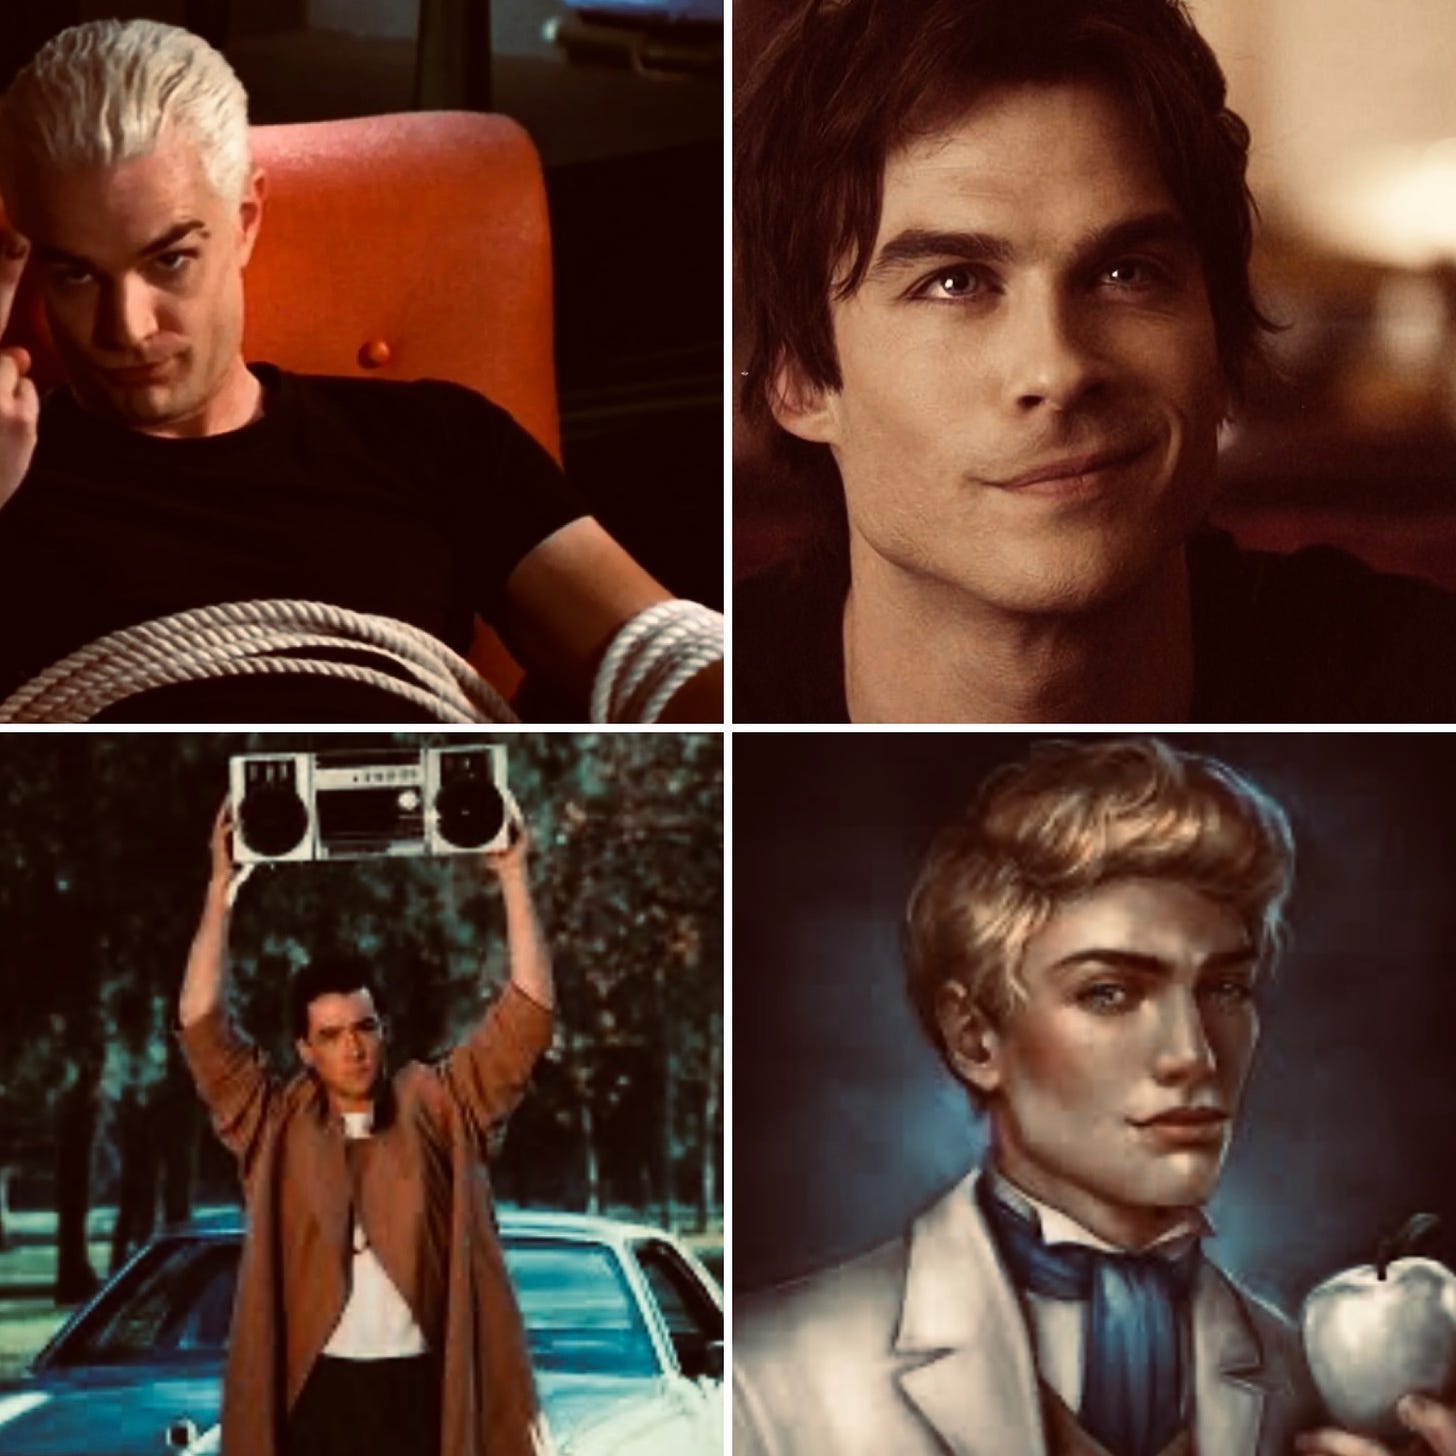 Four pictures: Spike from Buffy the Vampire Slayer, Damon from The Vampire Diaries, Lloyd from Say Anything, and Jacks from Once Upon a Broken Heart